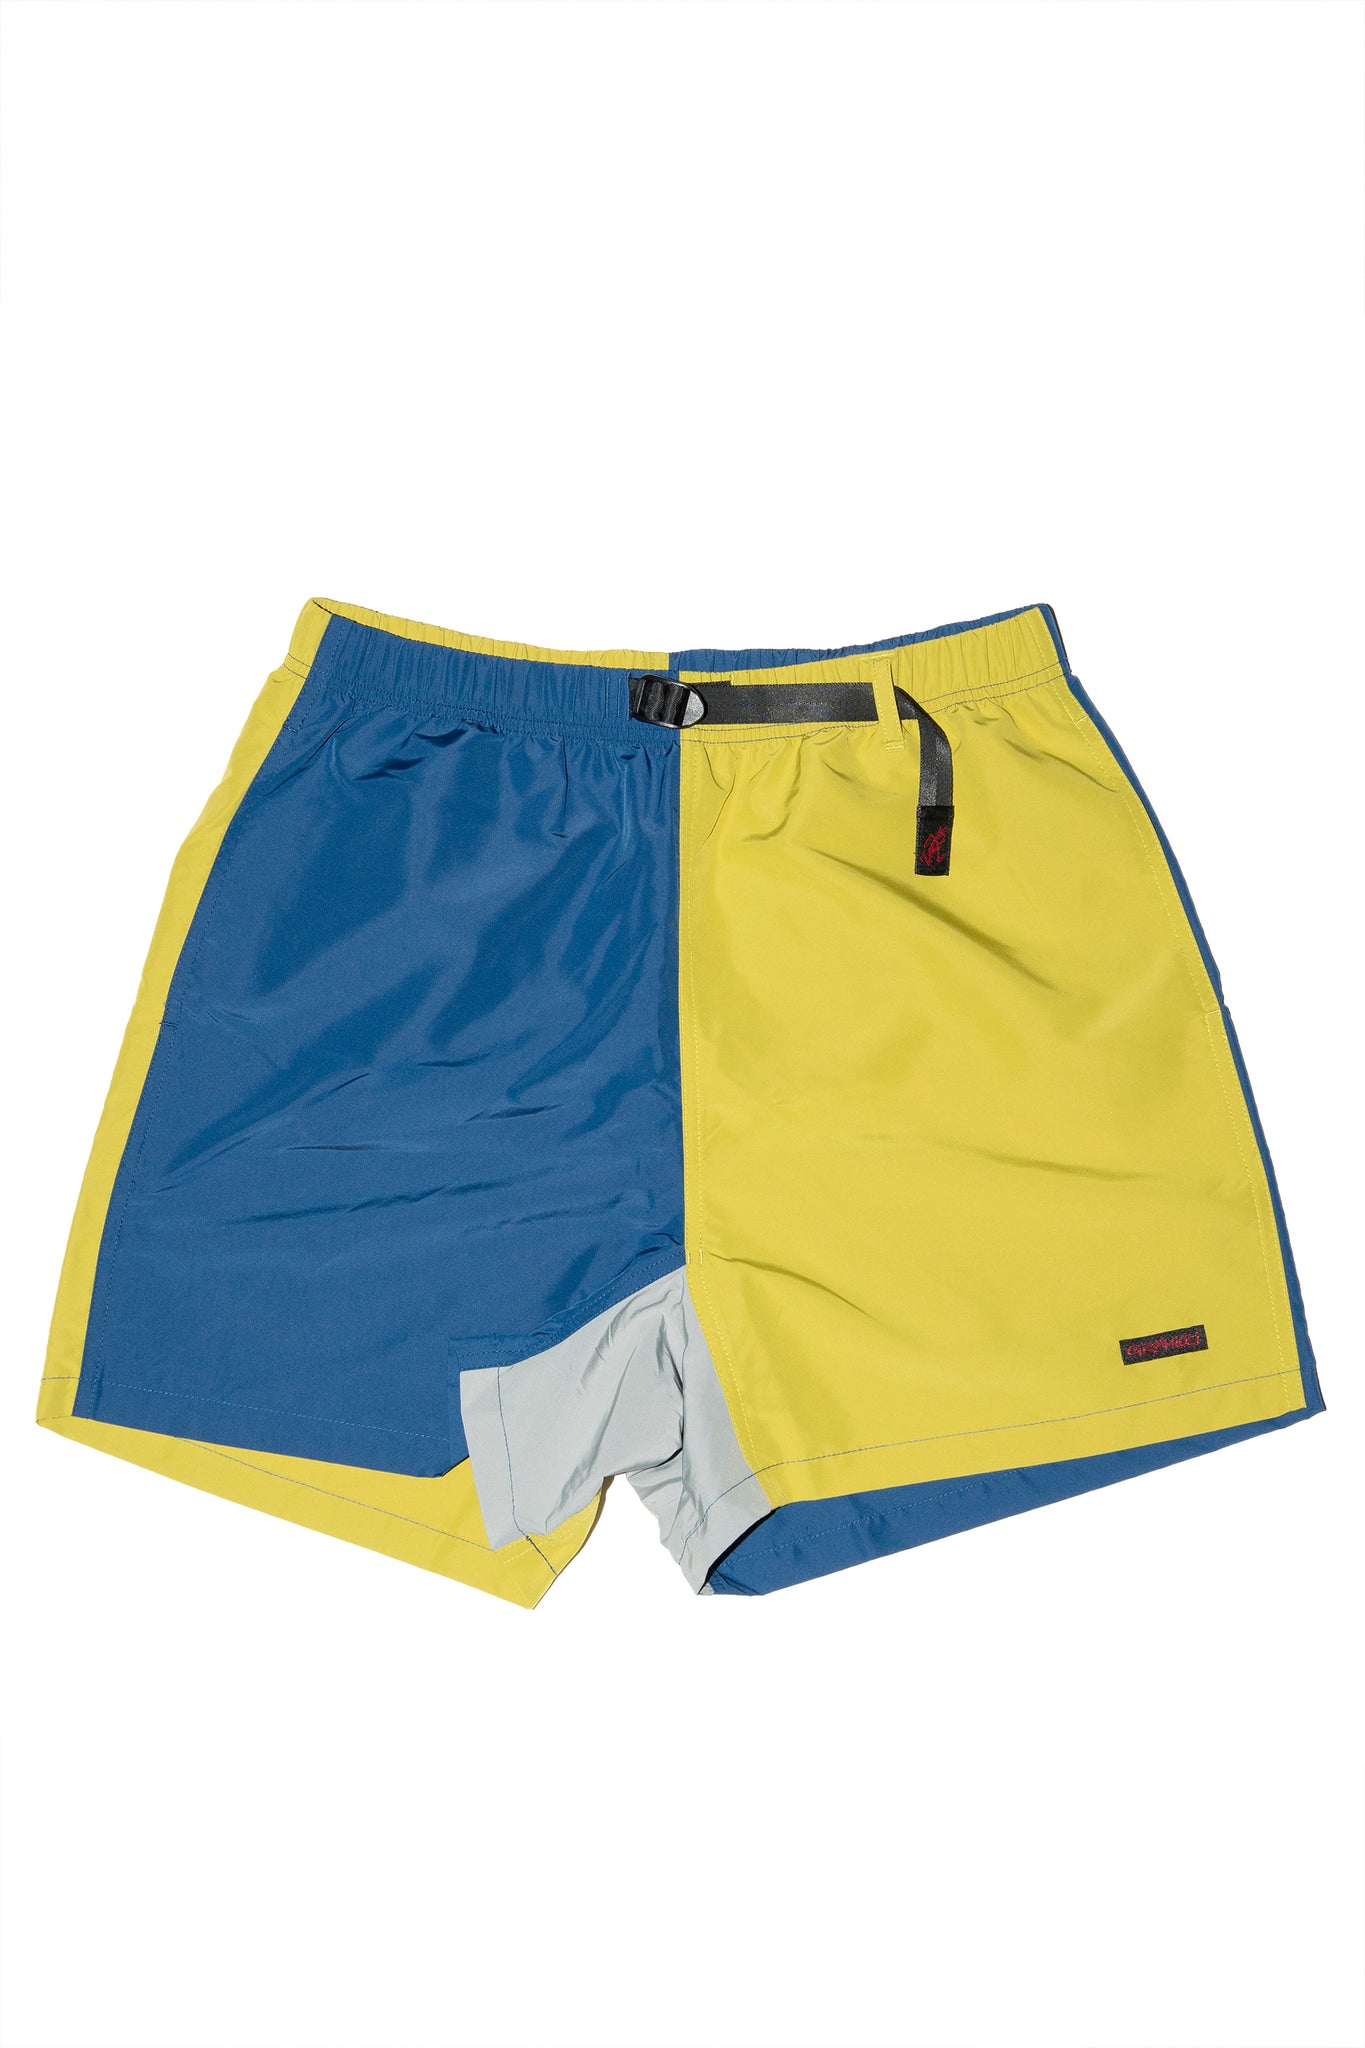 understory-shop - GRAMICCI - SHELL CANYON SHORT